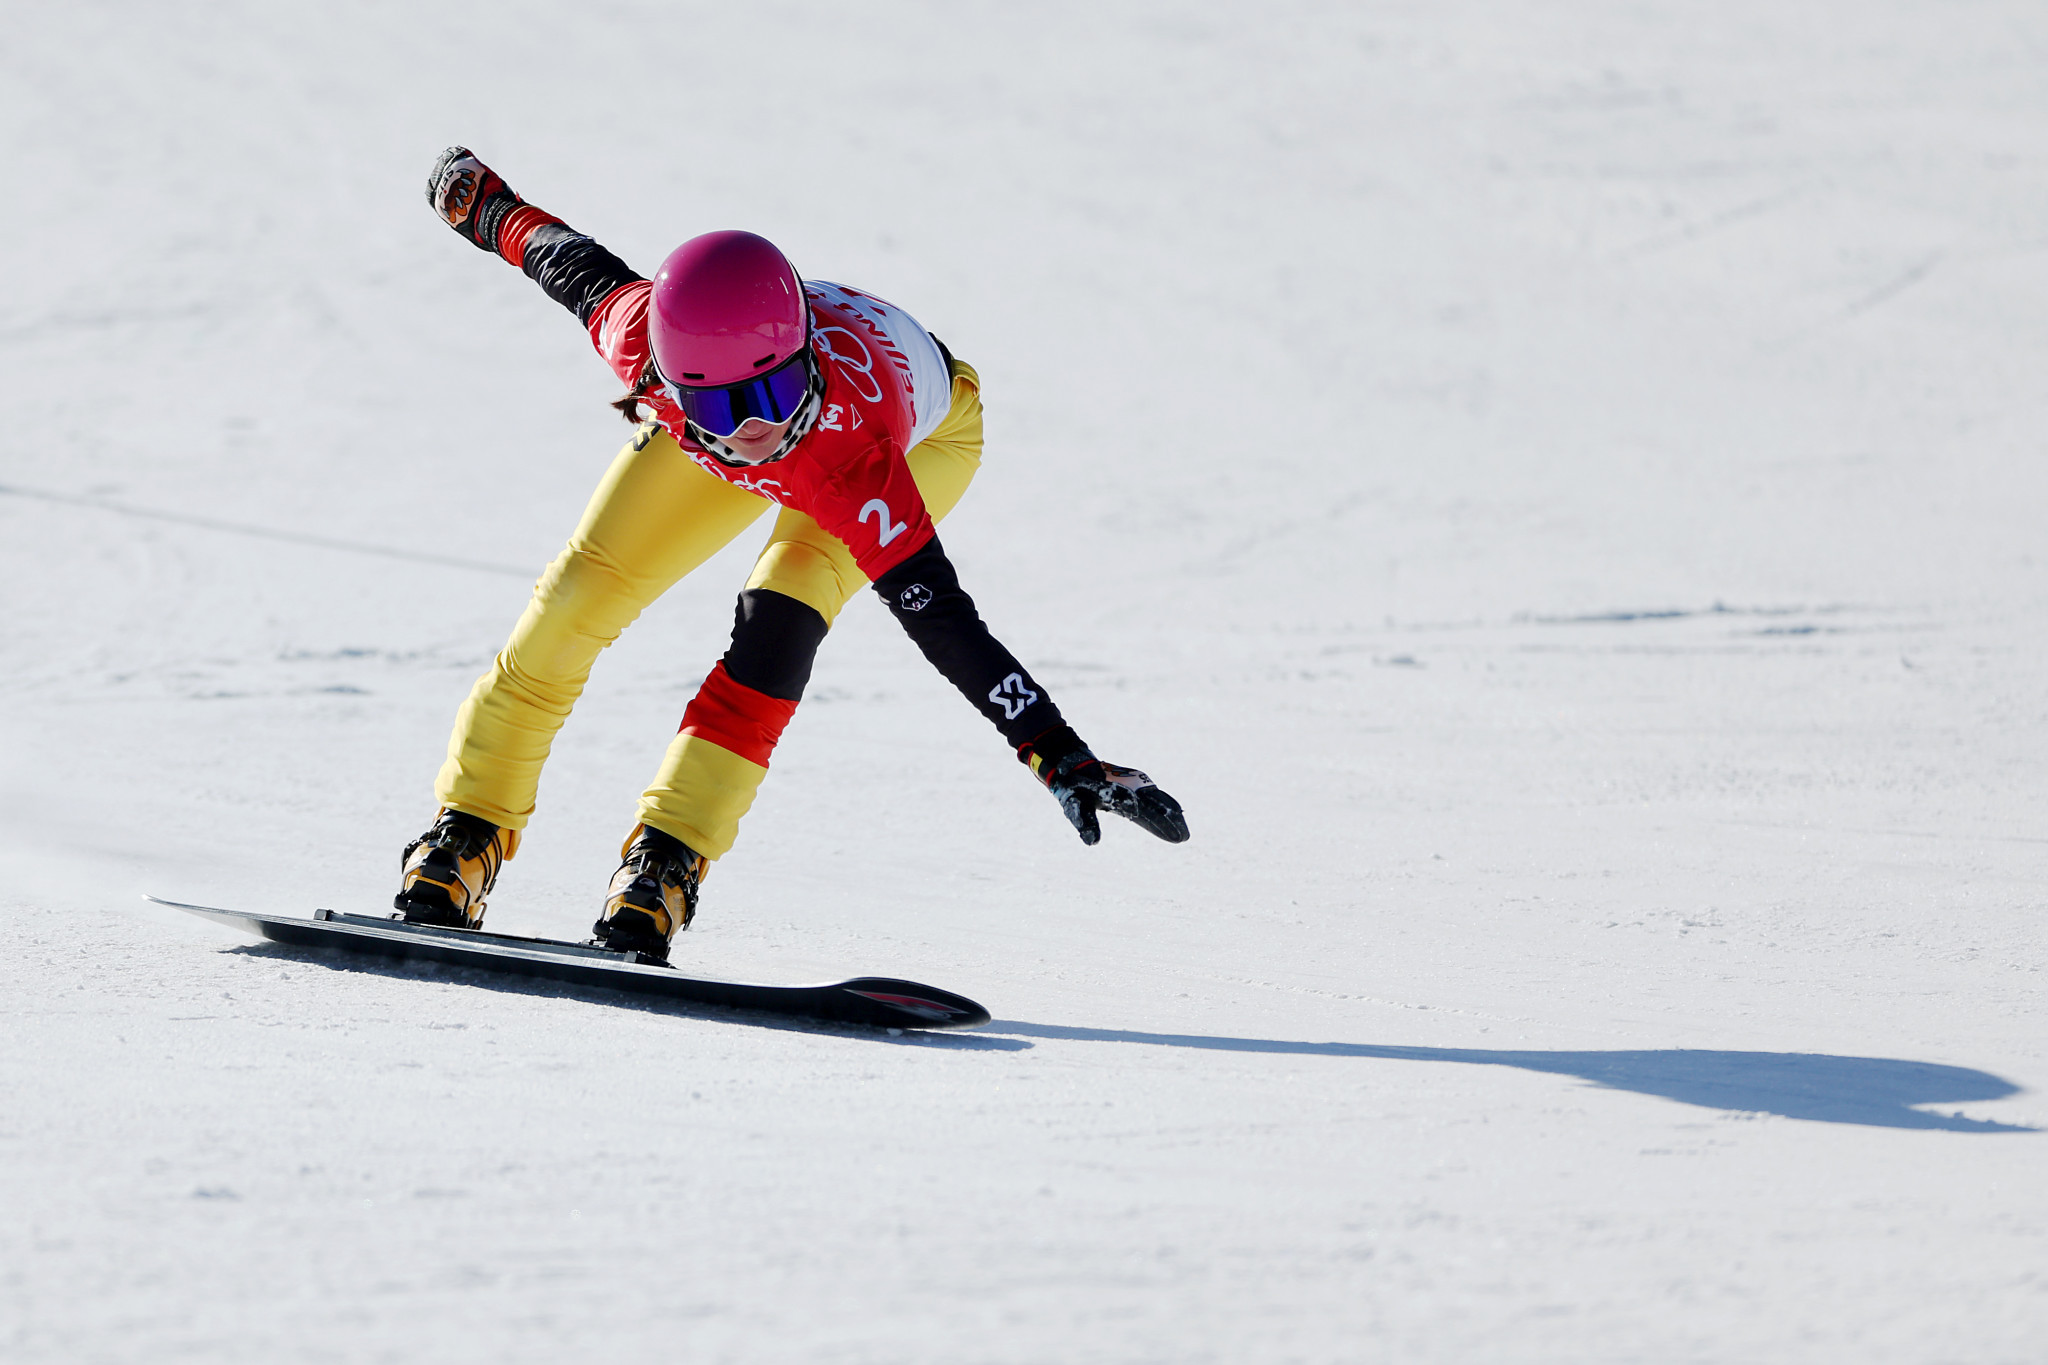 Ramona Theresia Hofmeister is the overall Alpine Ski World Cup champion for the third season in a row ©Getty Images